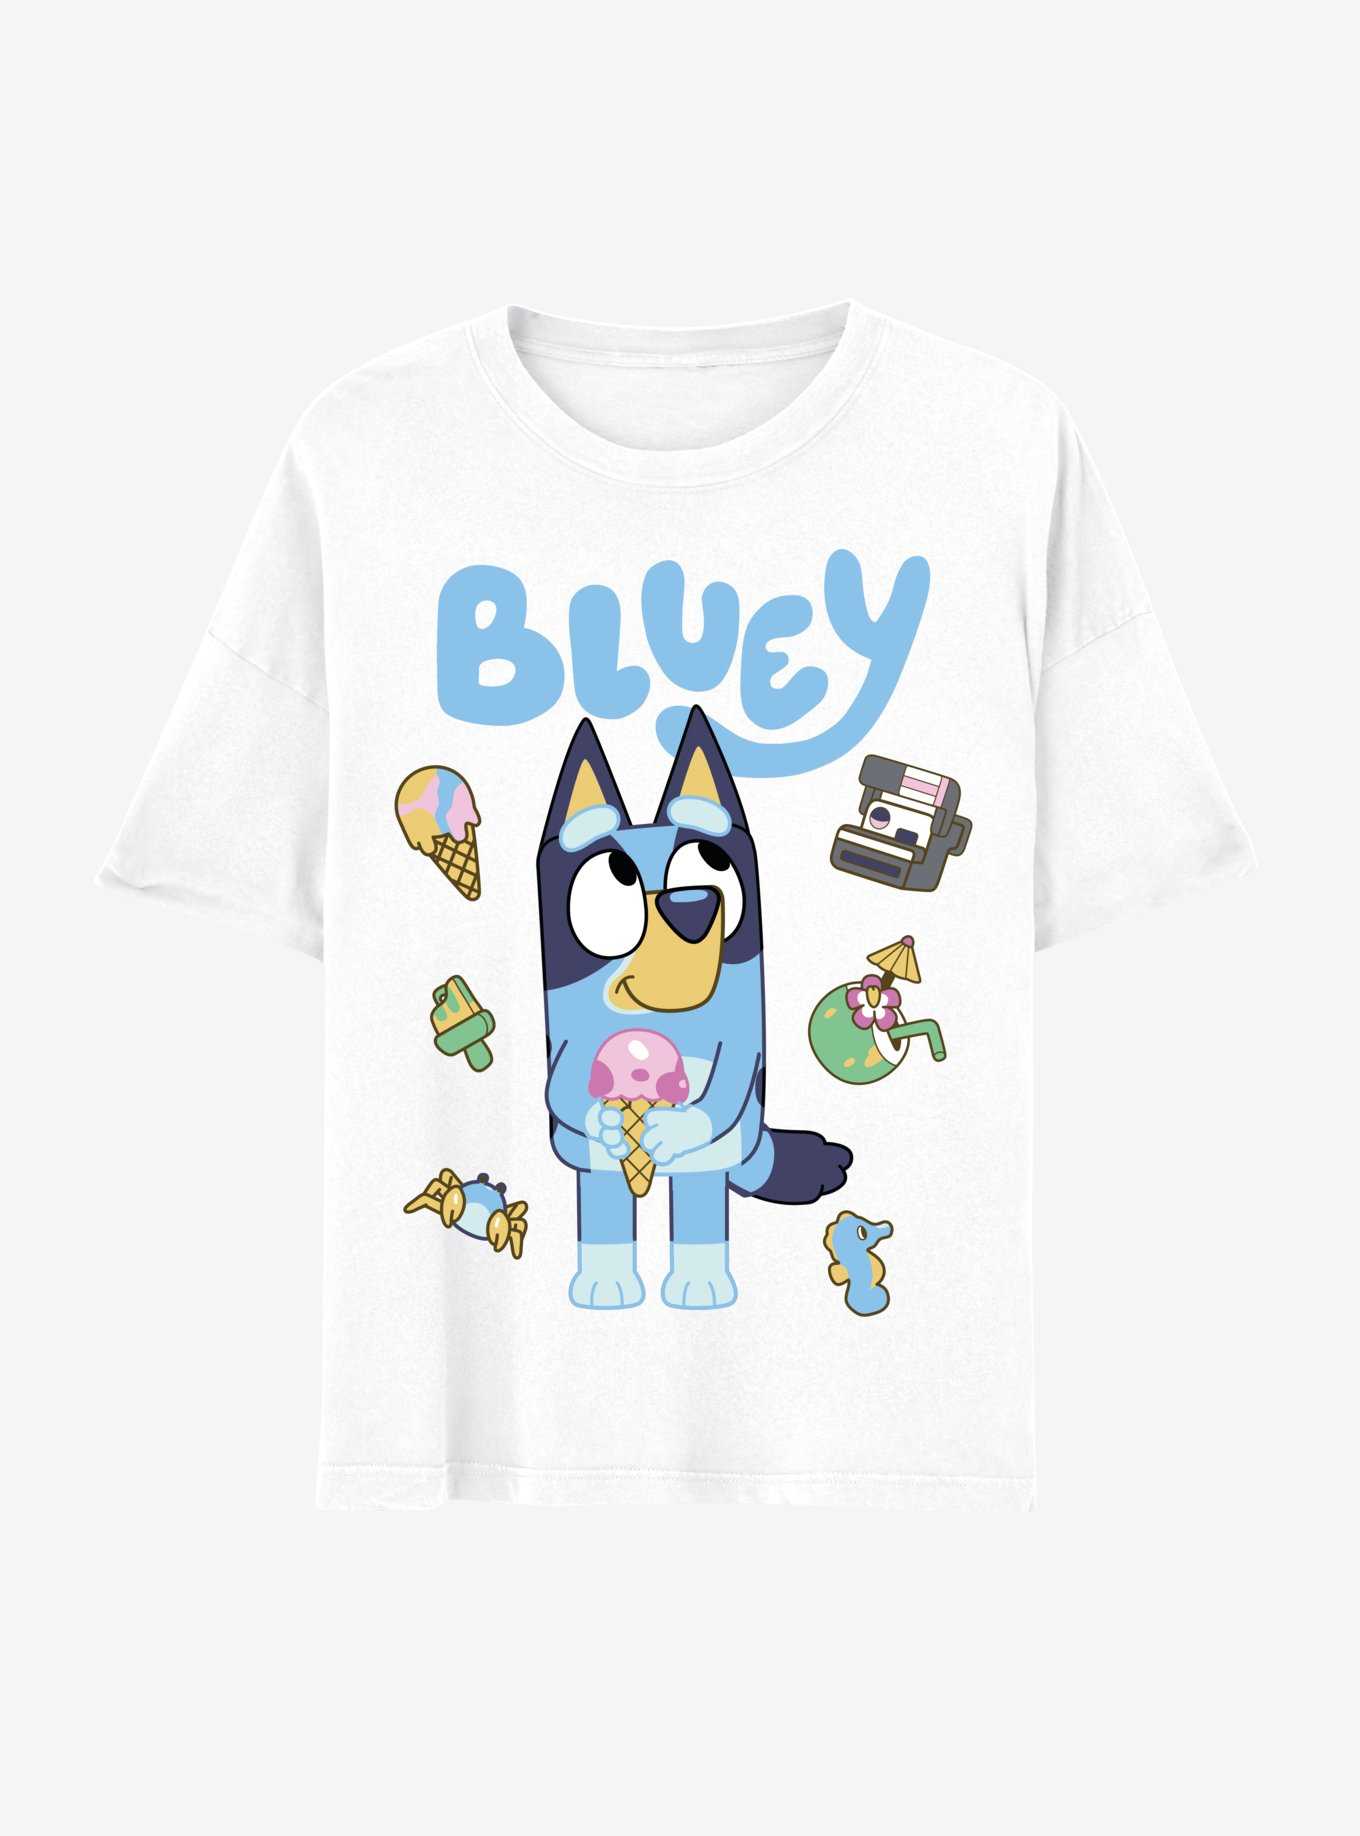 Official Bluey Merchandise